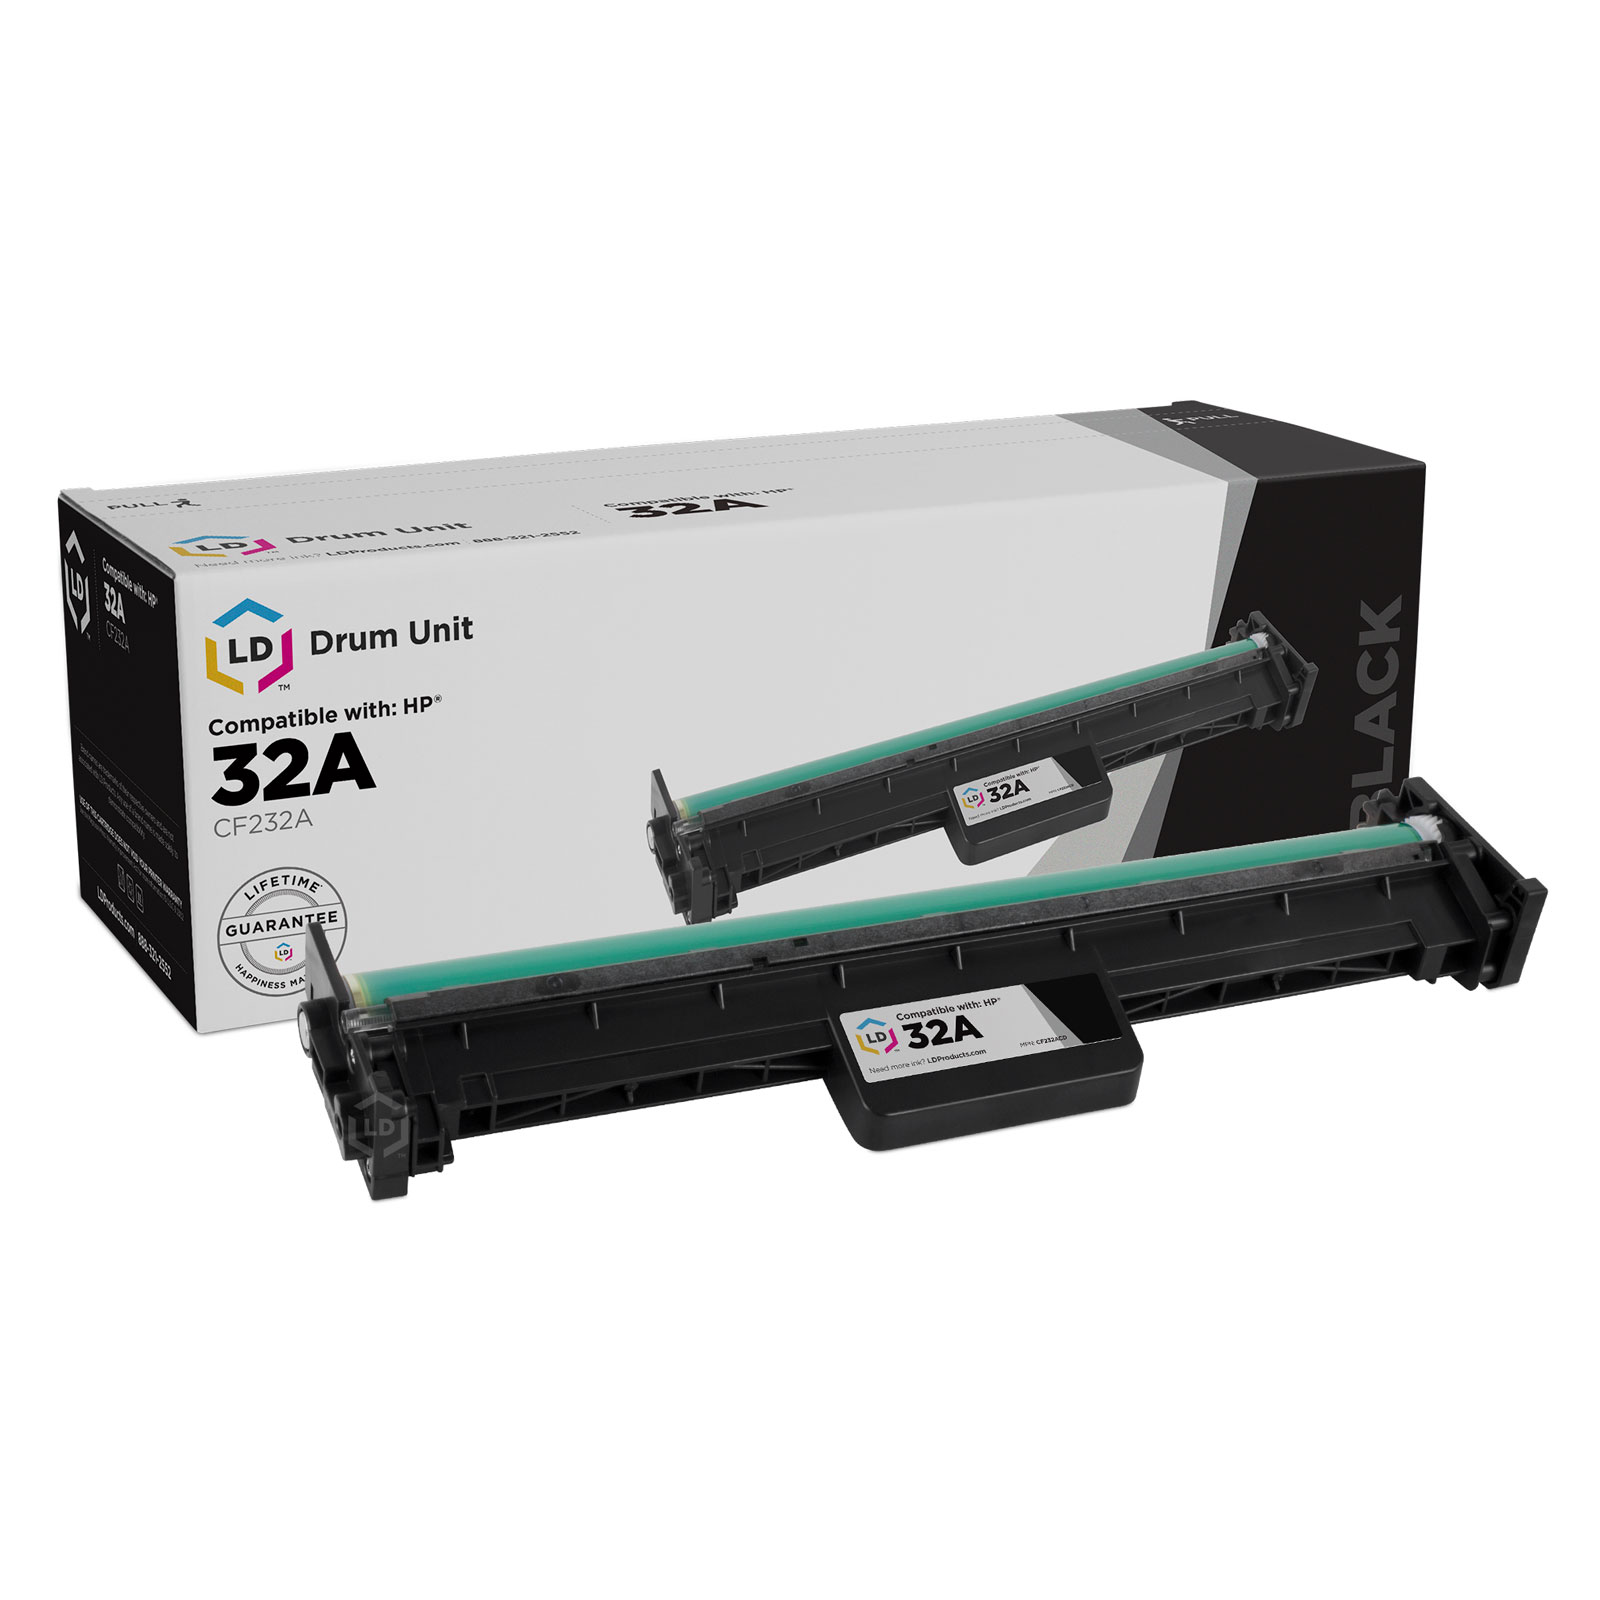 LD Compatible Drum Unit Replacement for HP 32A CF232A for use in HP LaserJet M203dw, MFP M227d, MFP M227fdn, MFP M227fdw, MFP M227sdn, MFP M230fdw, MFP M230sdn, HP LaserJet Pro M118dw - image 1 of 7